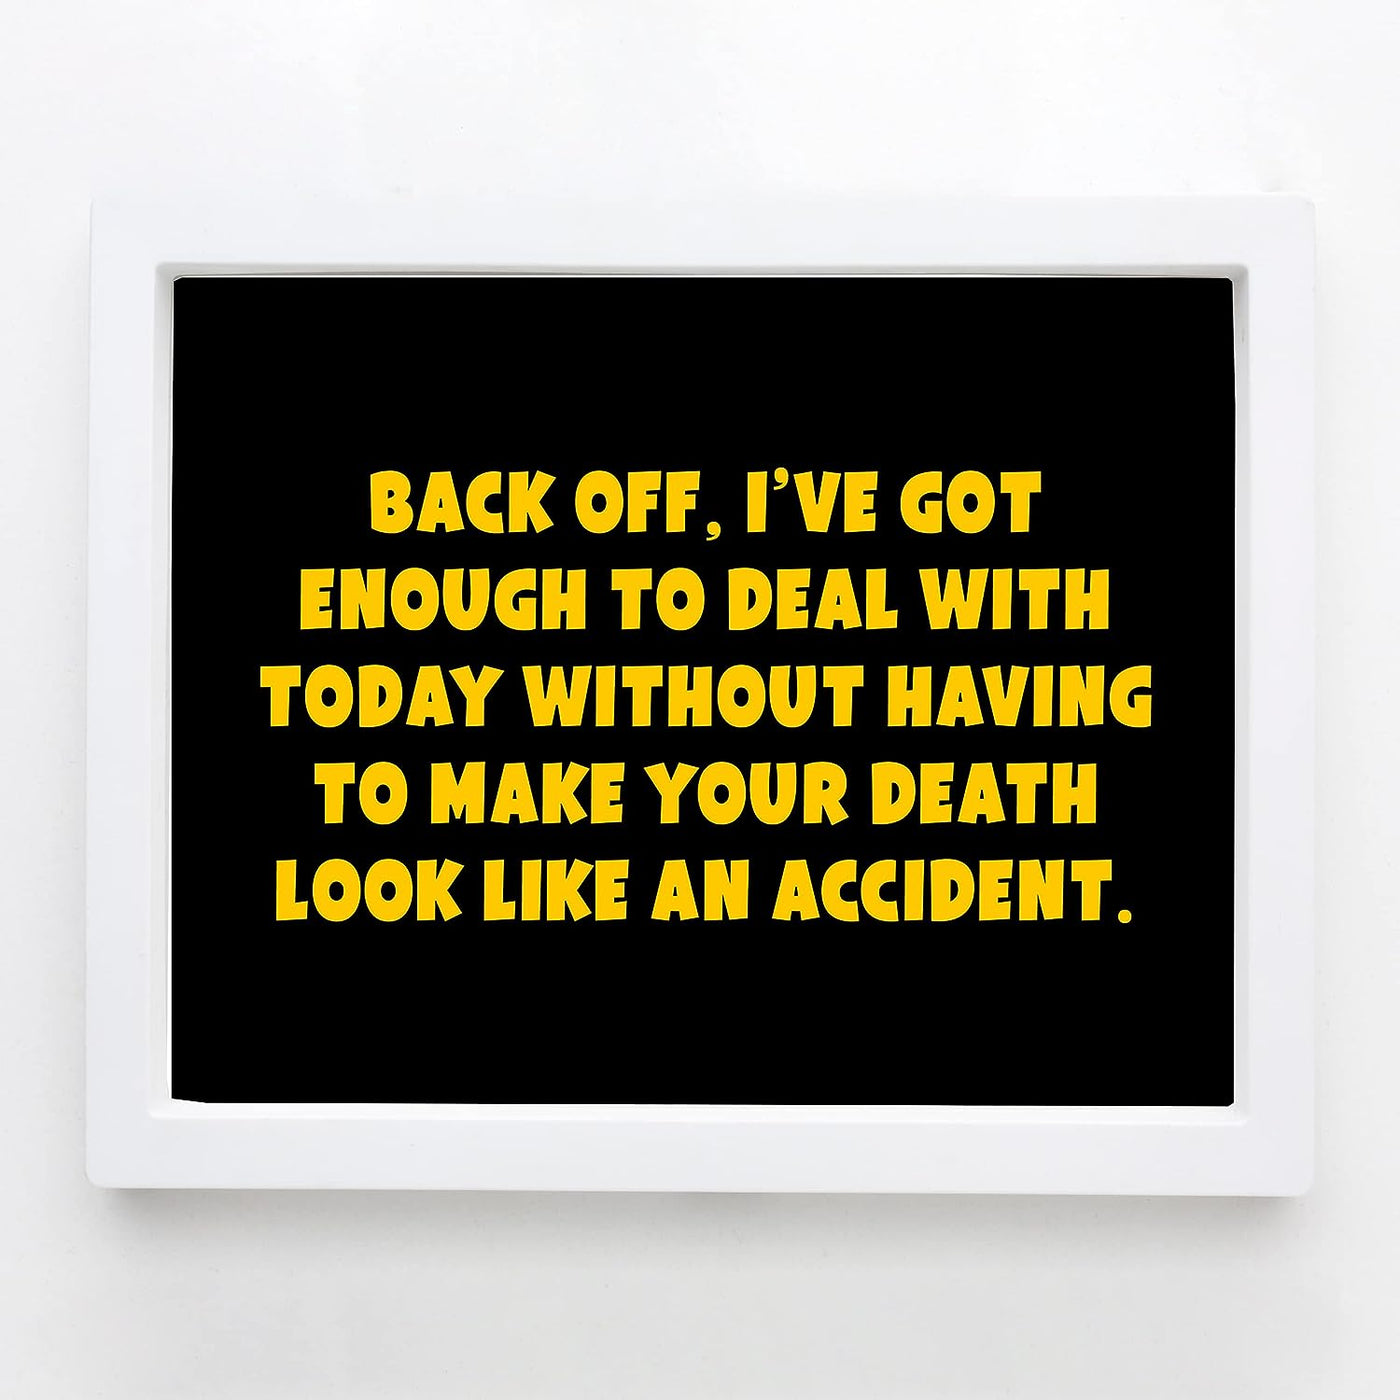 Back Off, Got Enough to Deal With Today Funny Rustic Wall Sign -10 x 8" Modern Typography Art Print-Ready to Frame. Humorous Decor for Home-Office-Work-Cubicle-Man Cave Decor. Fun Gift for Friends!